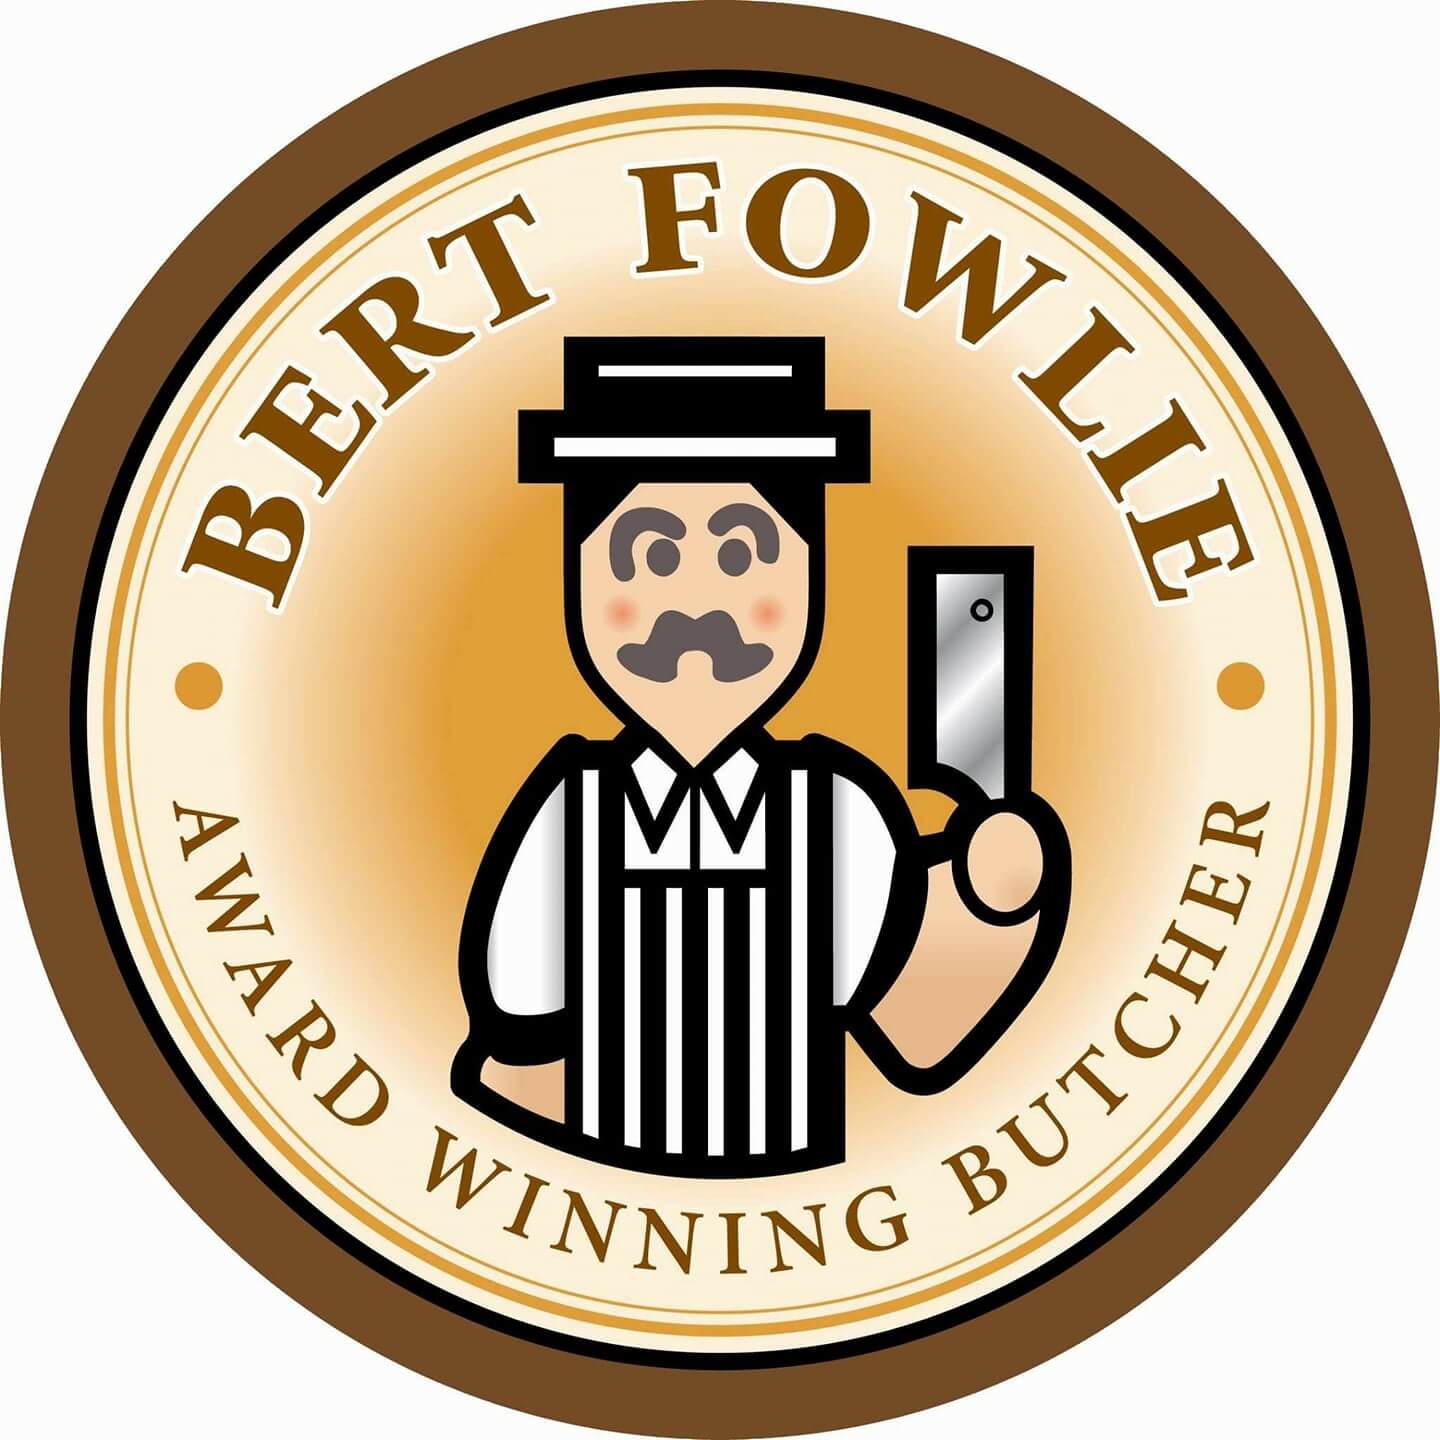 A glimpse of diverse products by Bert Fowlie Butchers, supporting the UK economy on YouK.